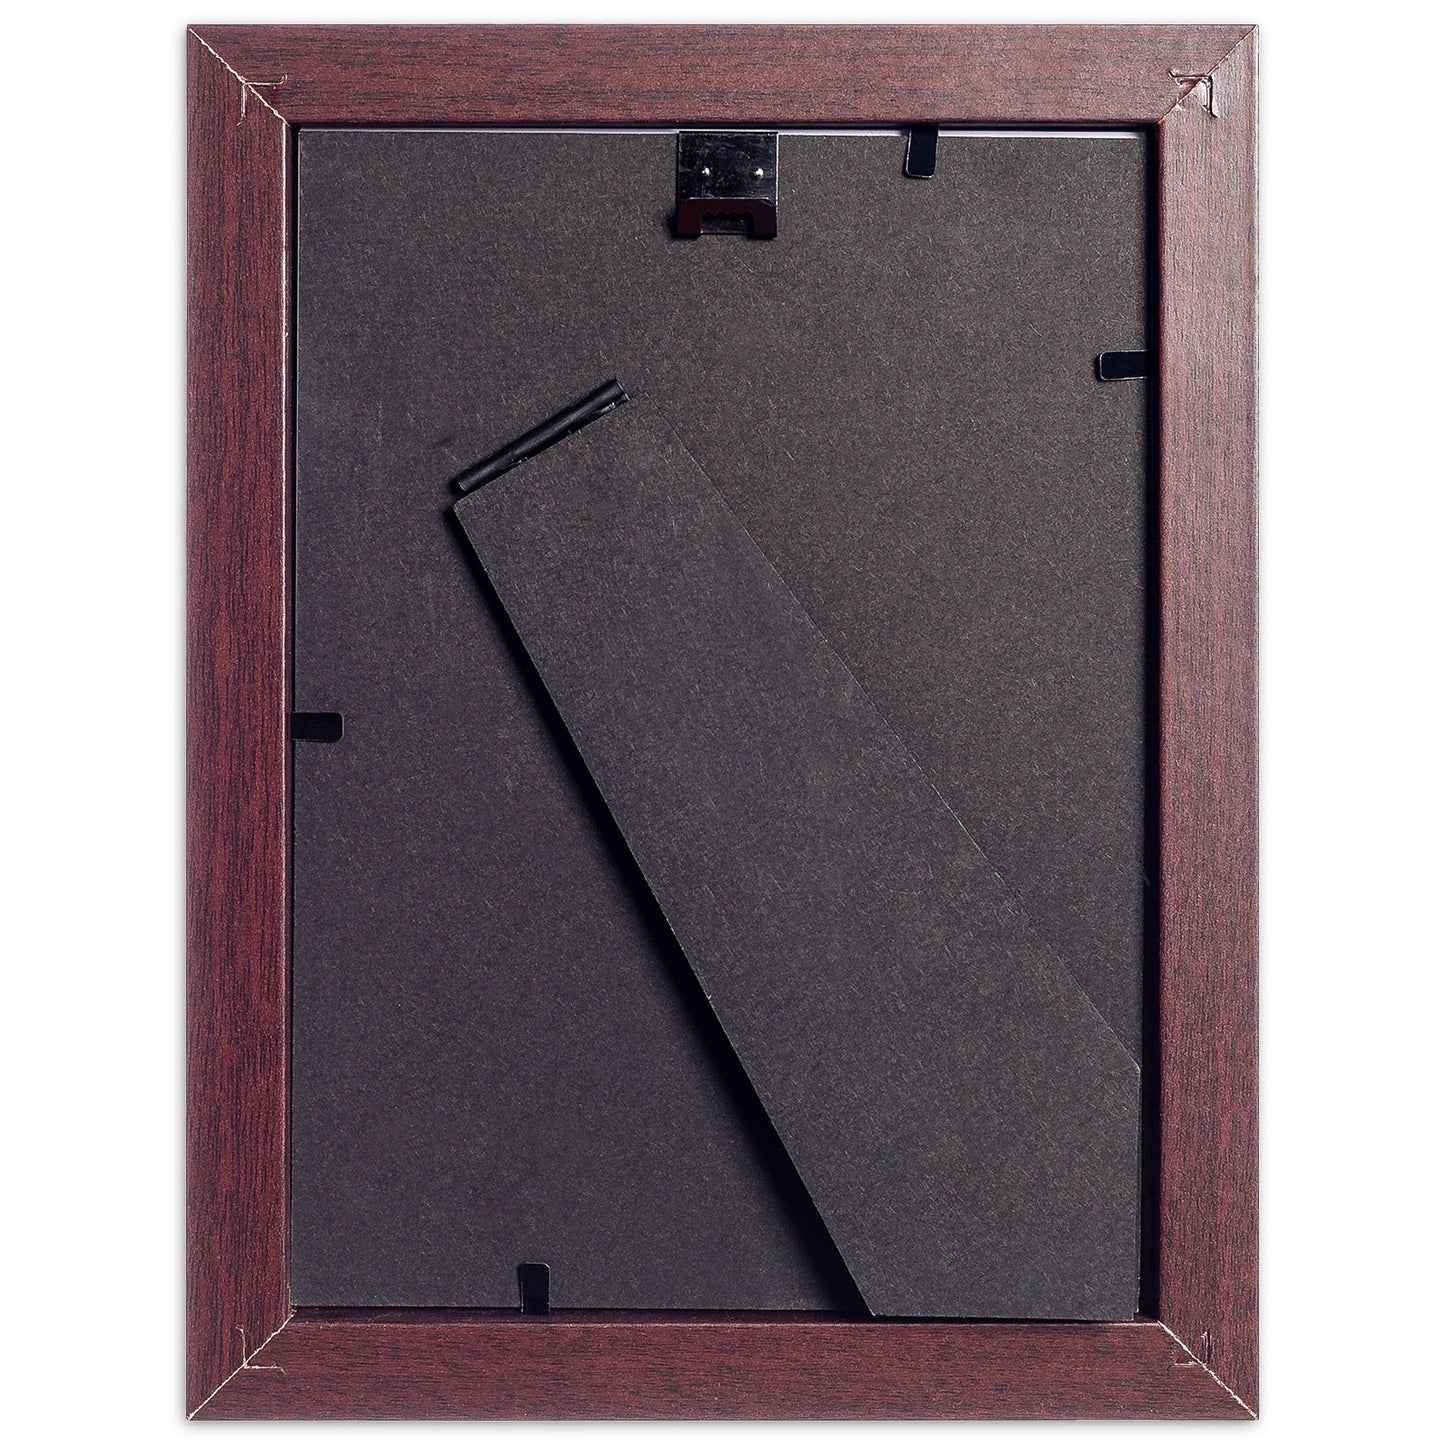 5" x 7" Classic Mahogany MDF Wood Picture Frame with Tempered Glass, 4" x 6" Matted